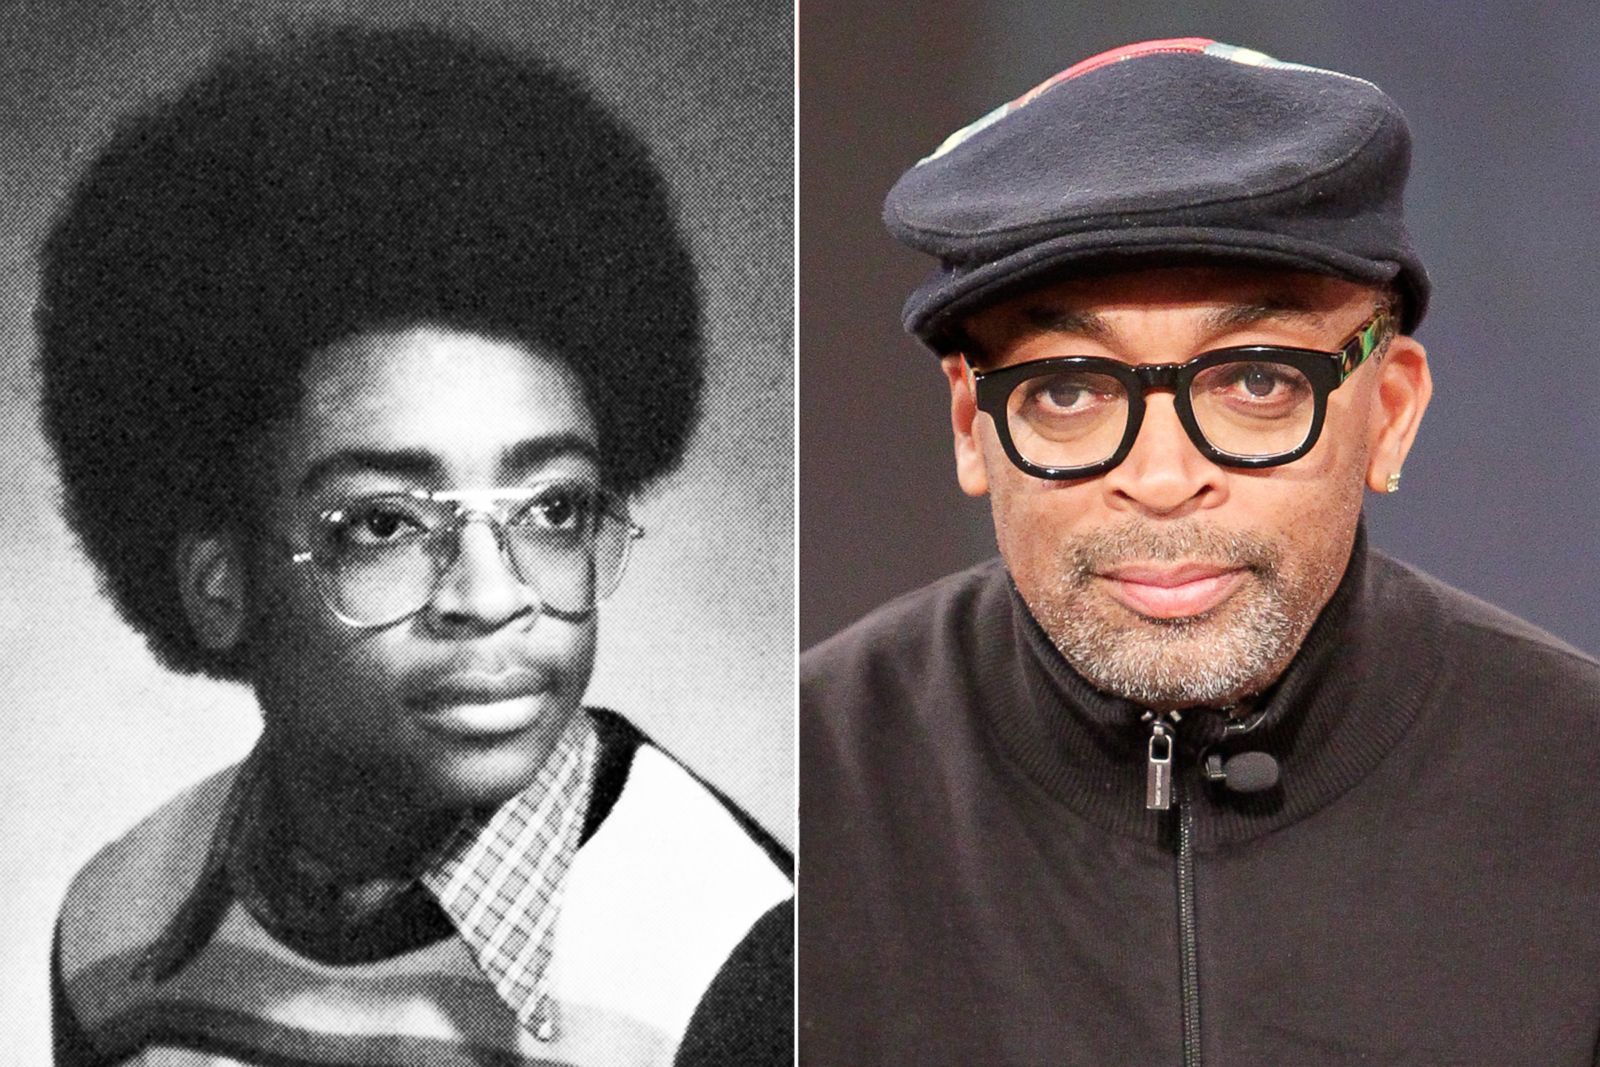 Spike Lee Picture | Before they were famous - ABC News1600 x 1067